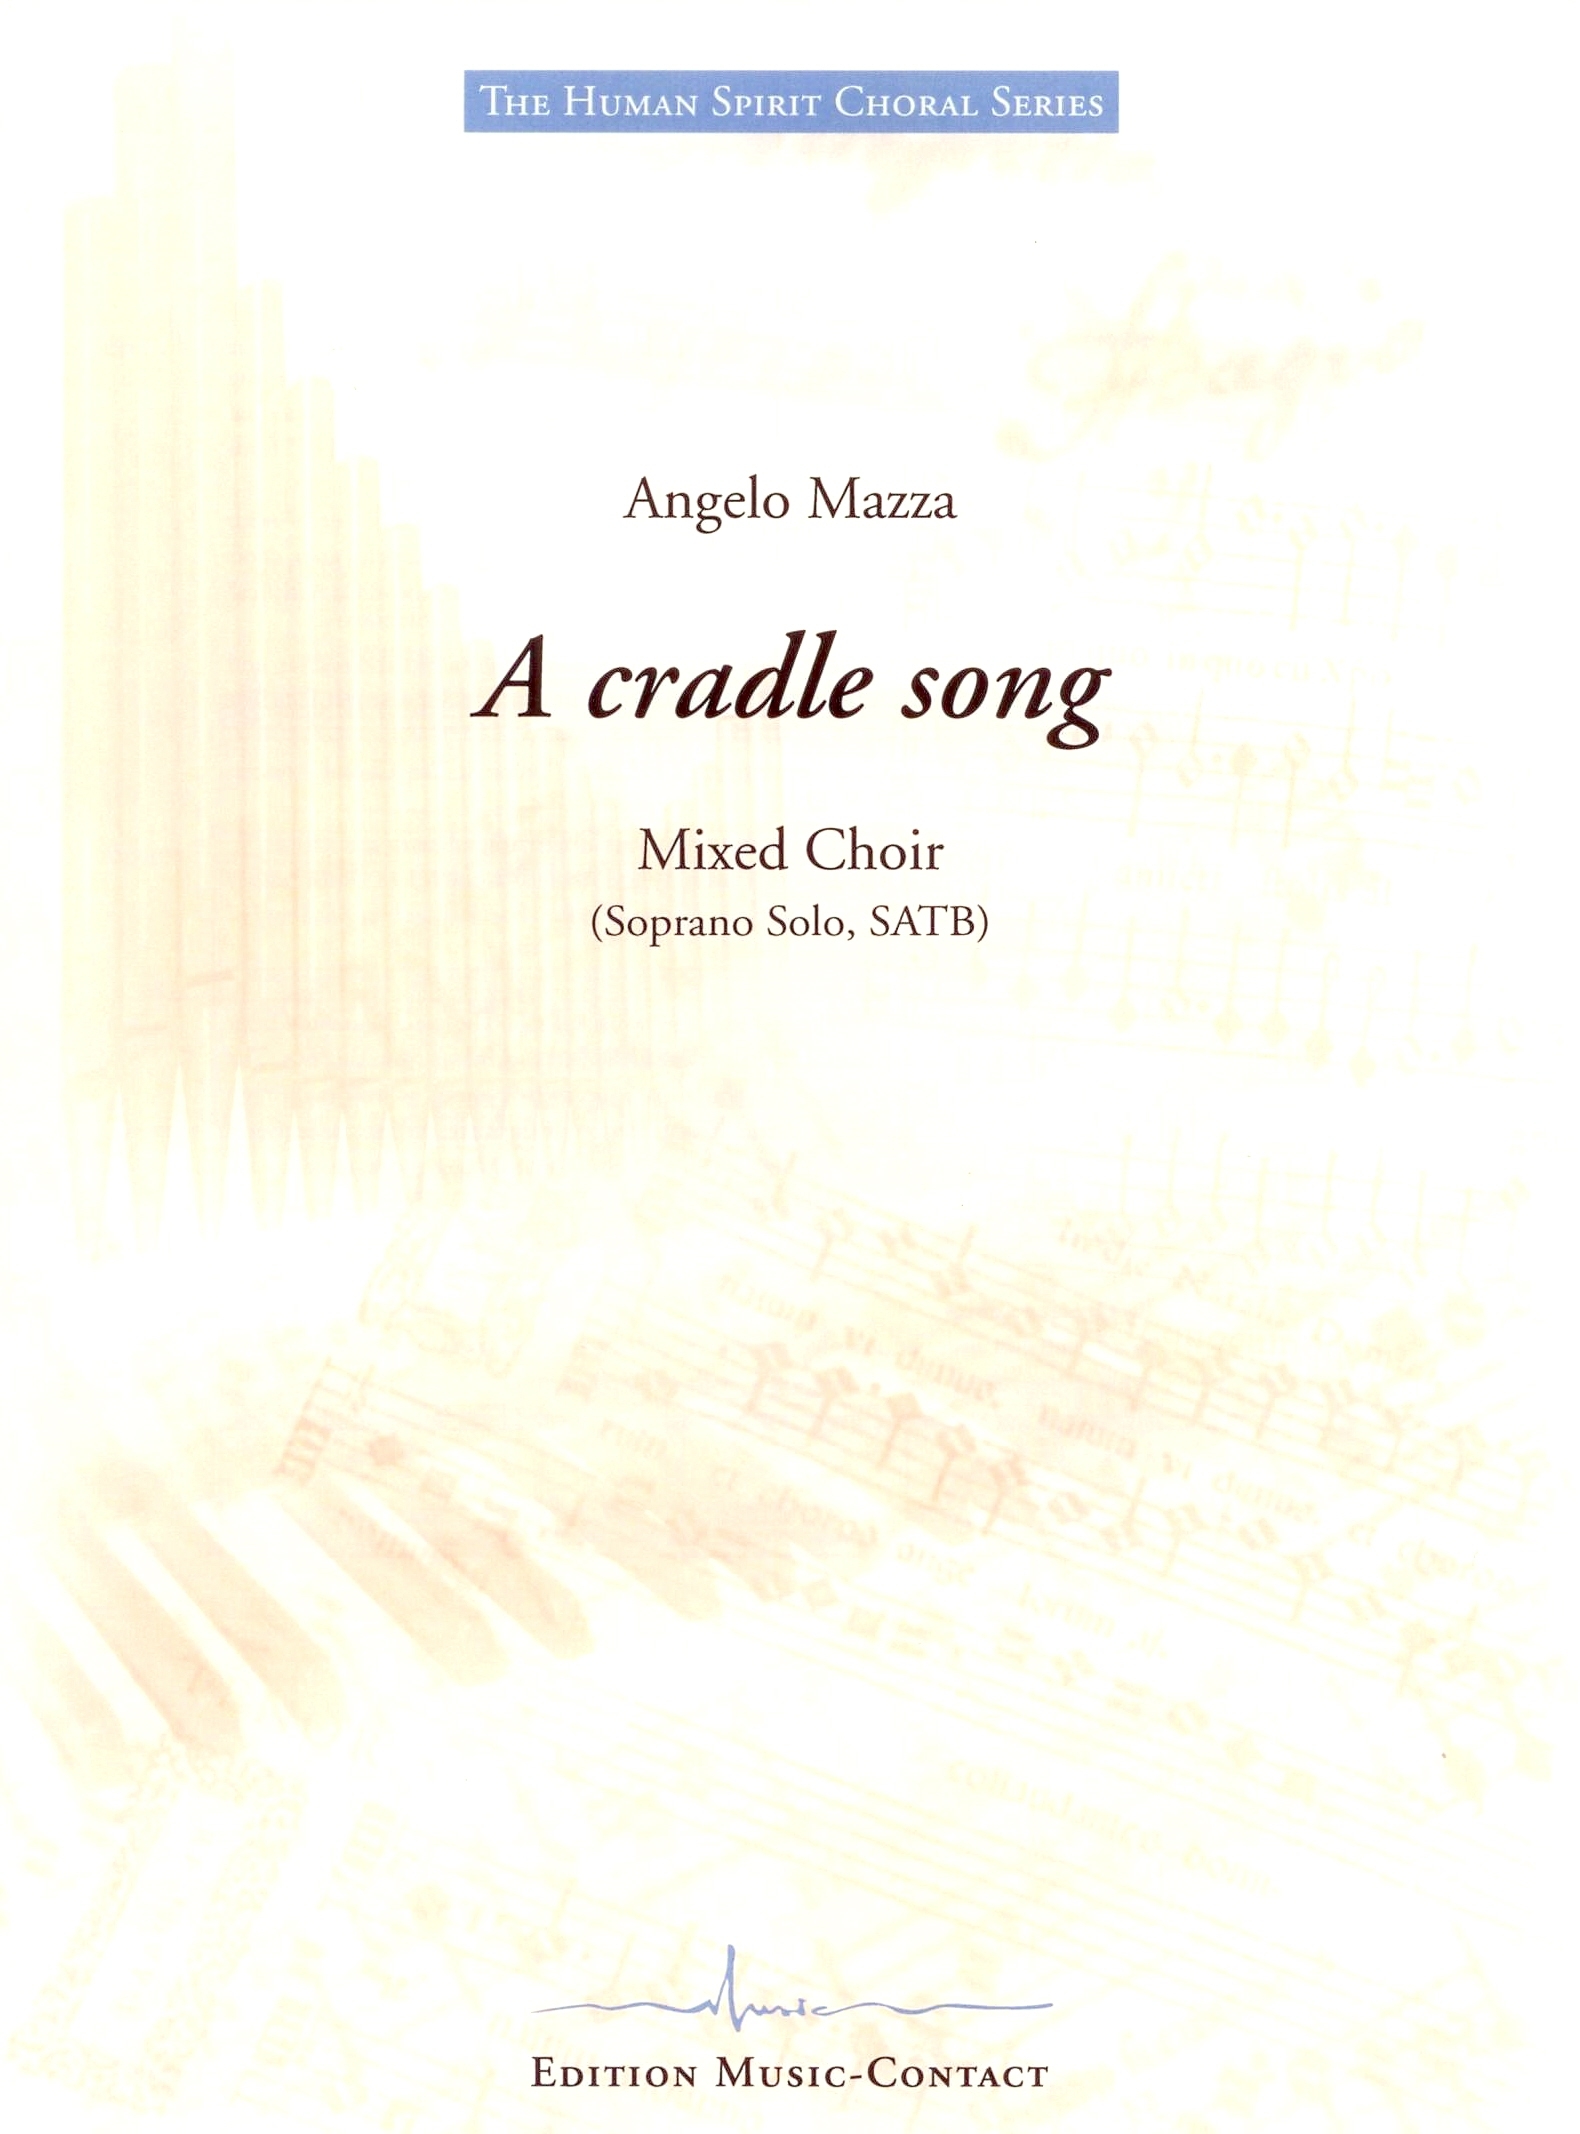 A cradle song